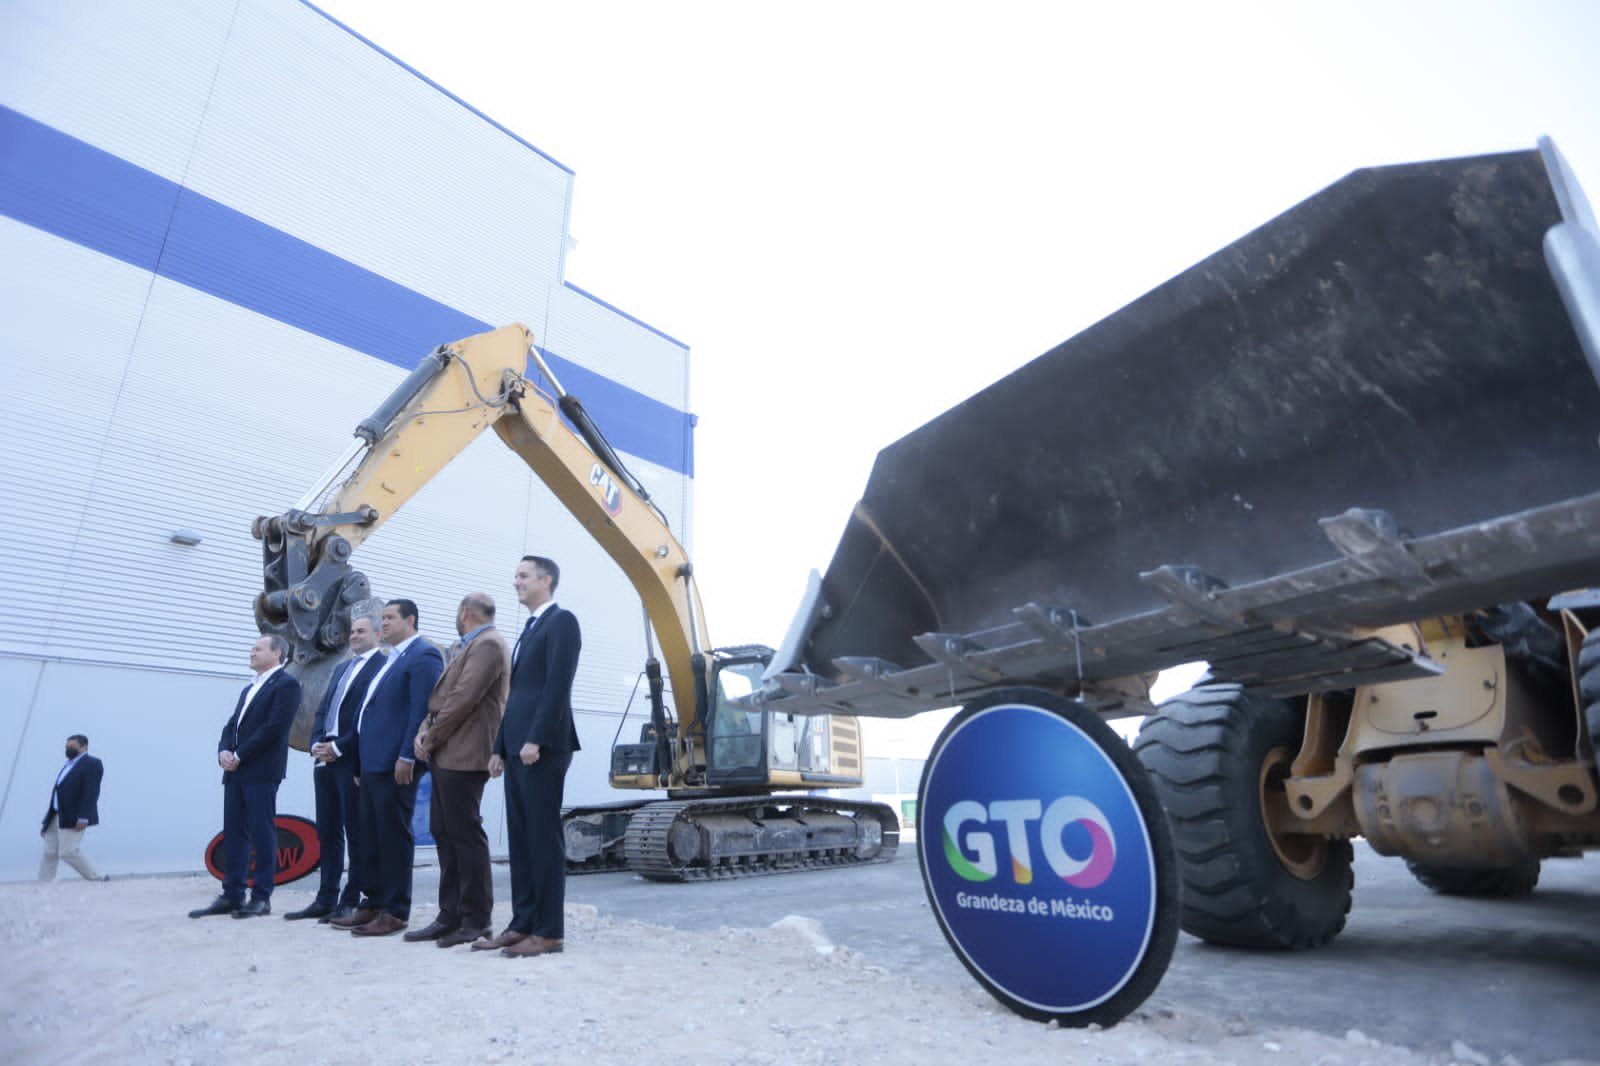 ZKW Guanajuato begins its 3rd expansion